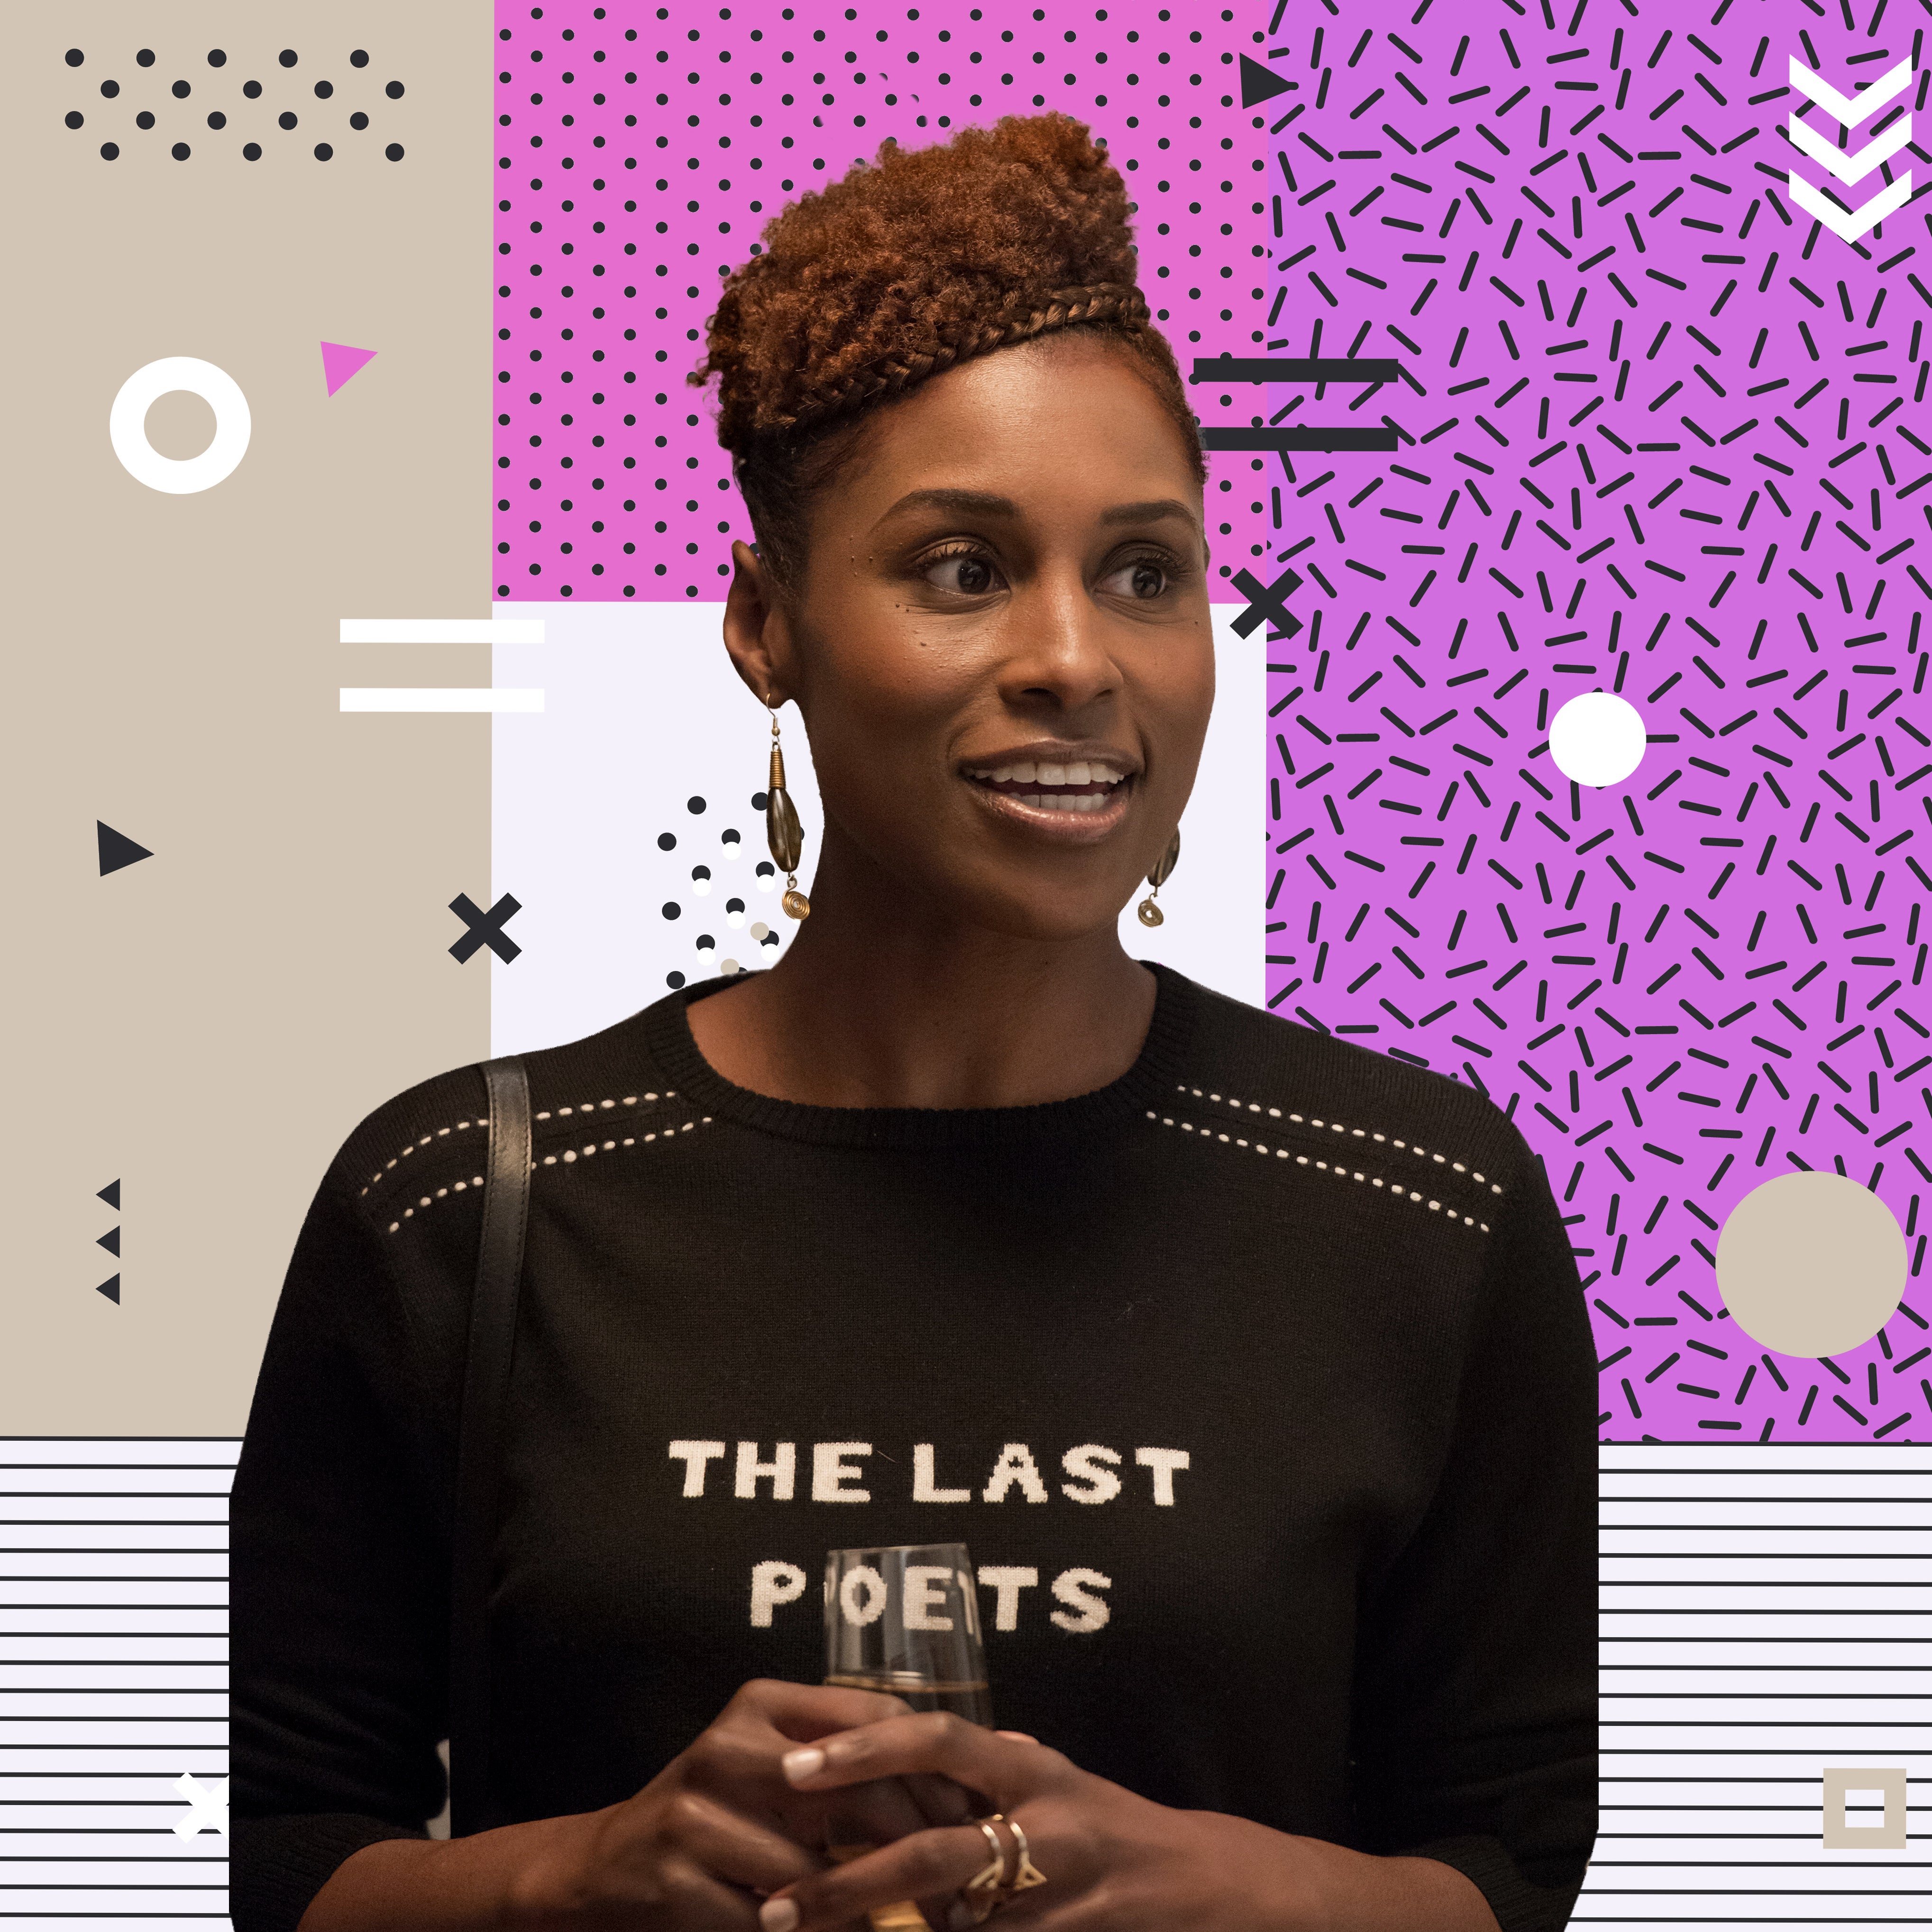 Issa Rae, Shonda Rhimes And More Recognized For Gender-Balanced Hiring Practices In Hollywood